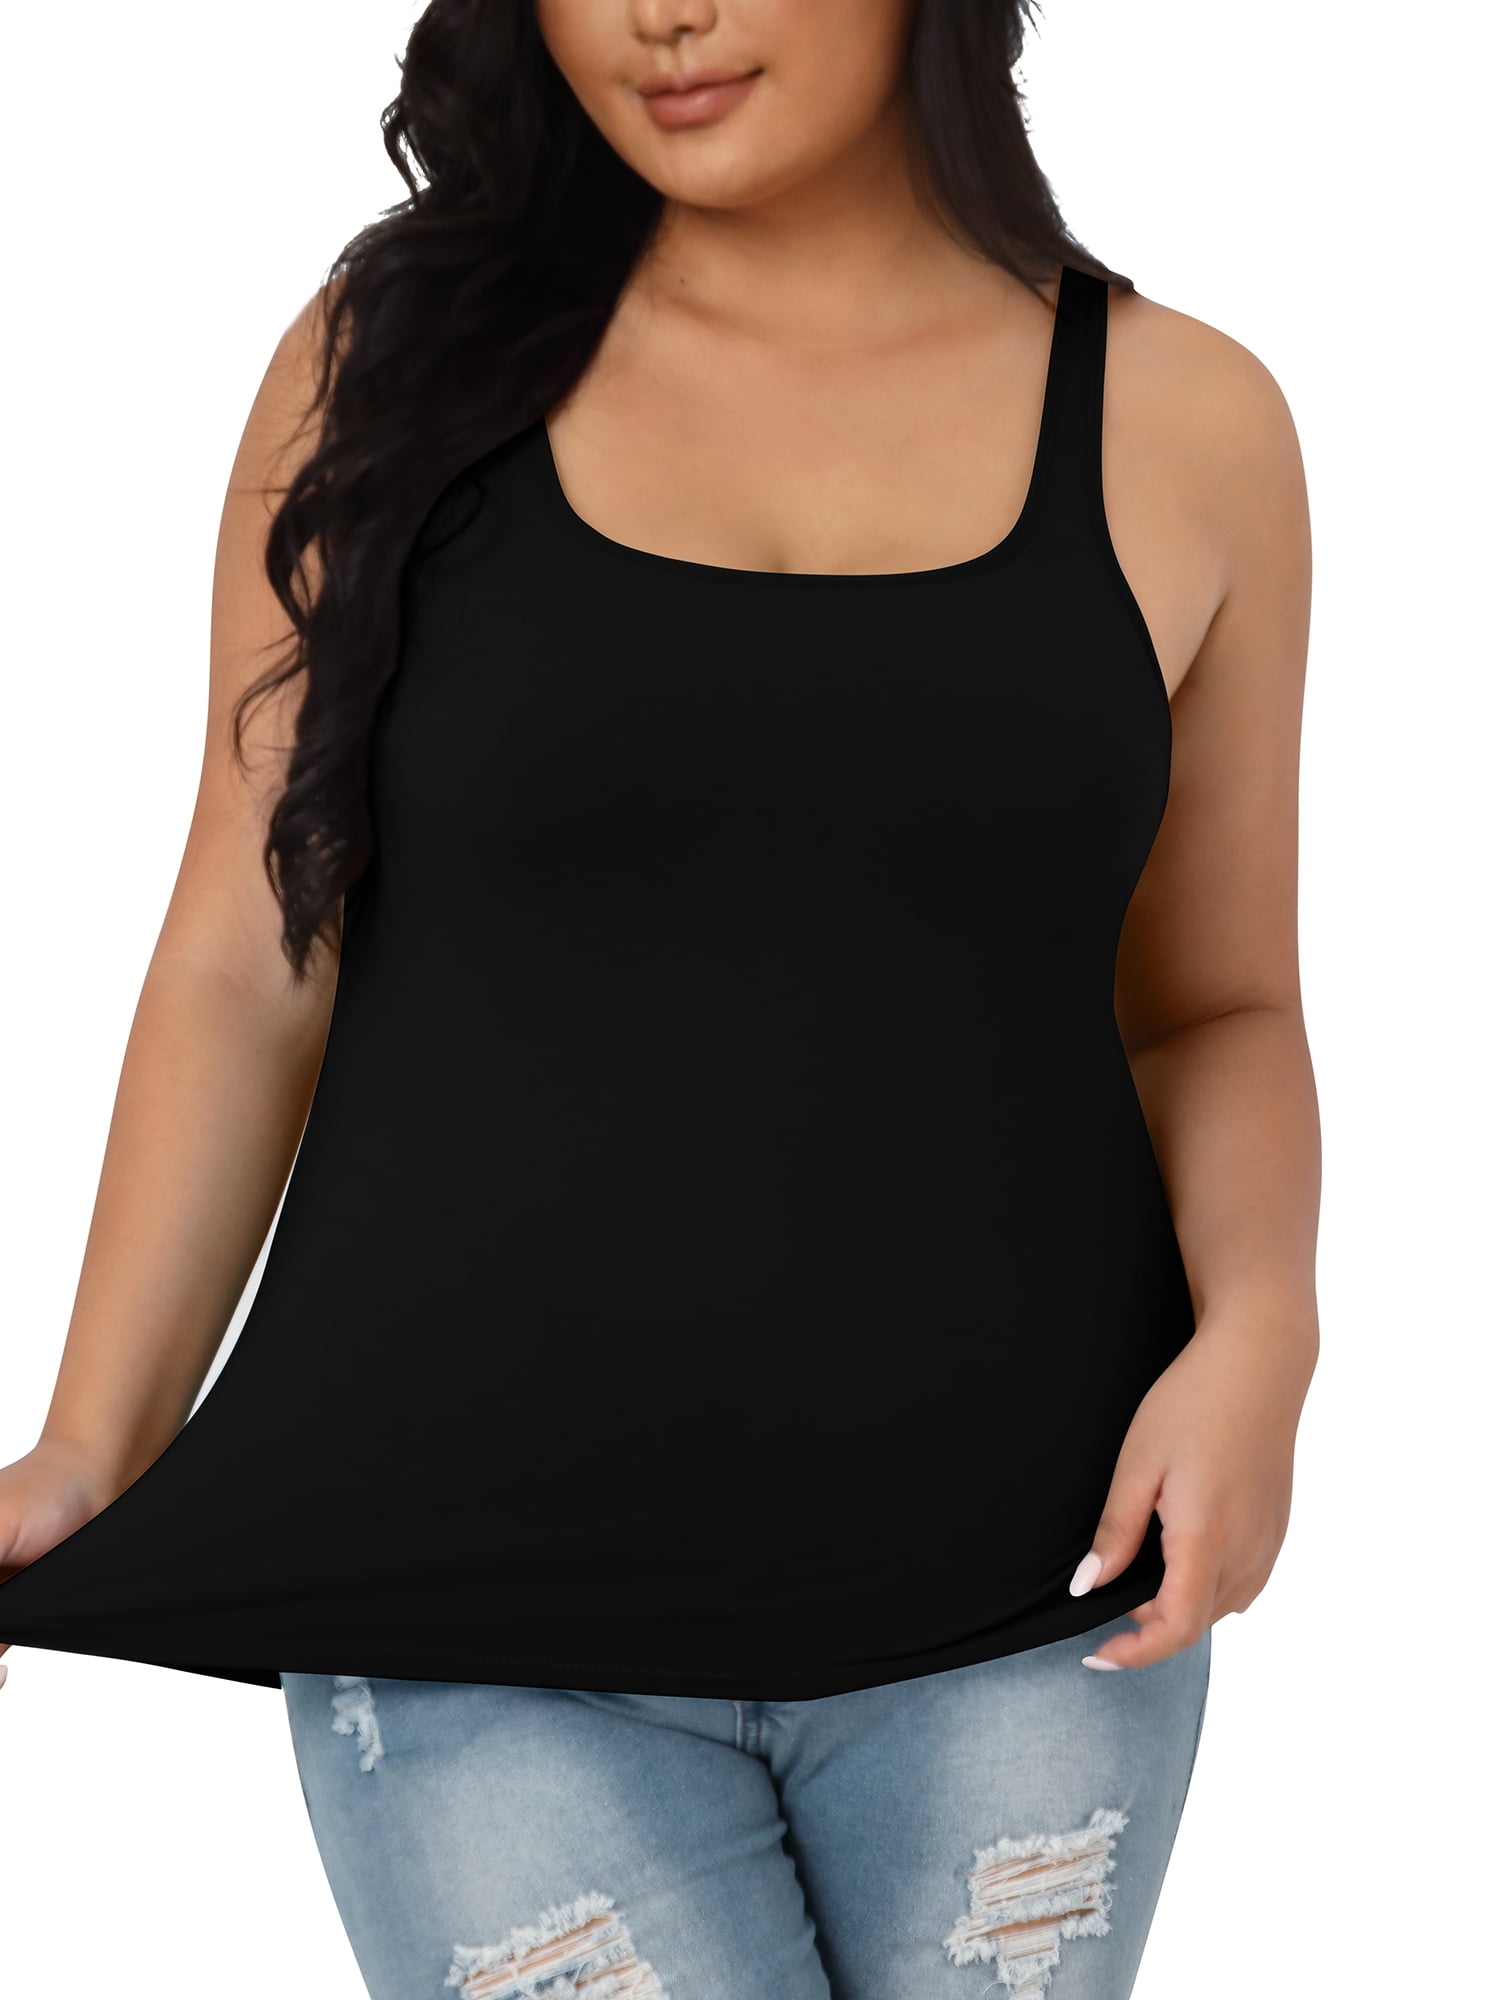 Best Deal for Square Neck Tank Top Plus Size Tank Tops for Women